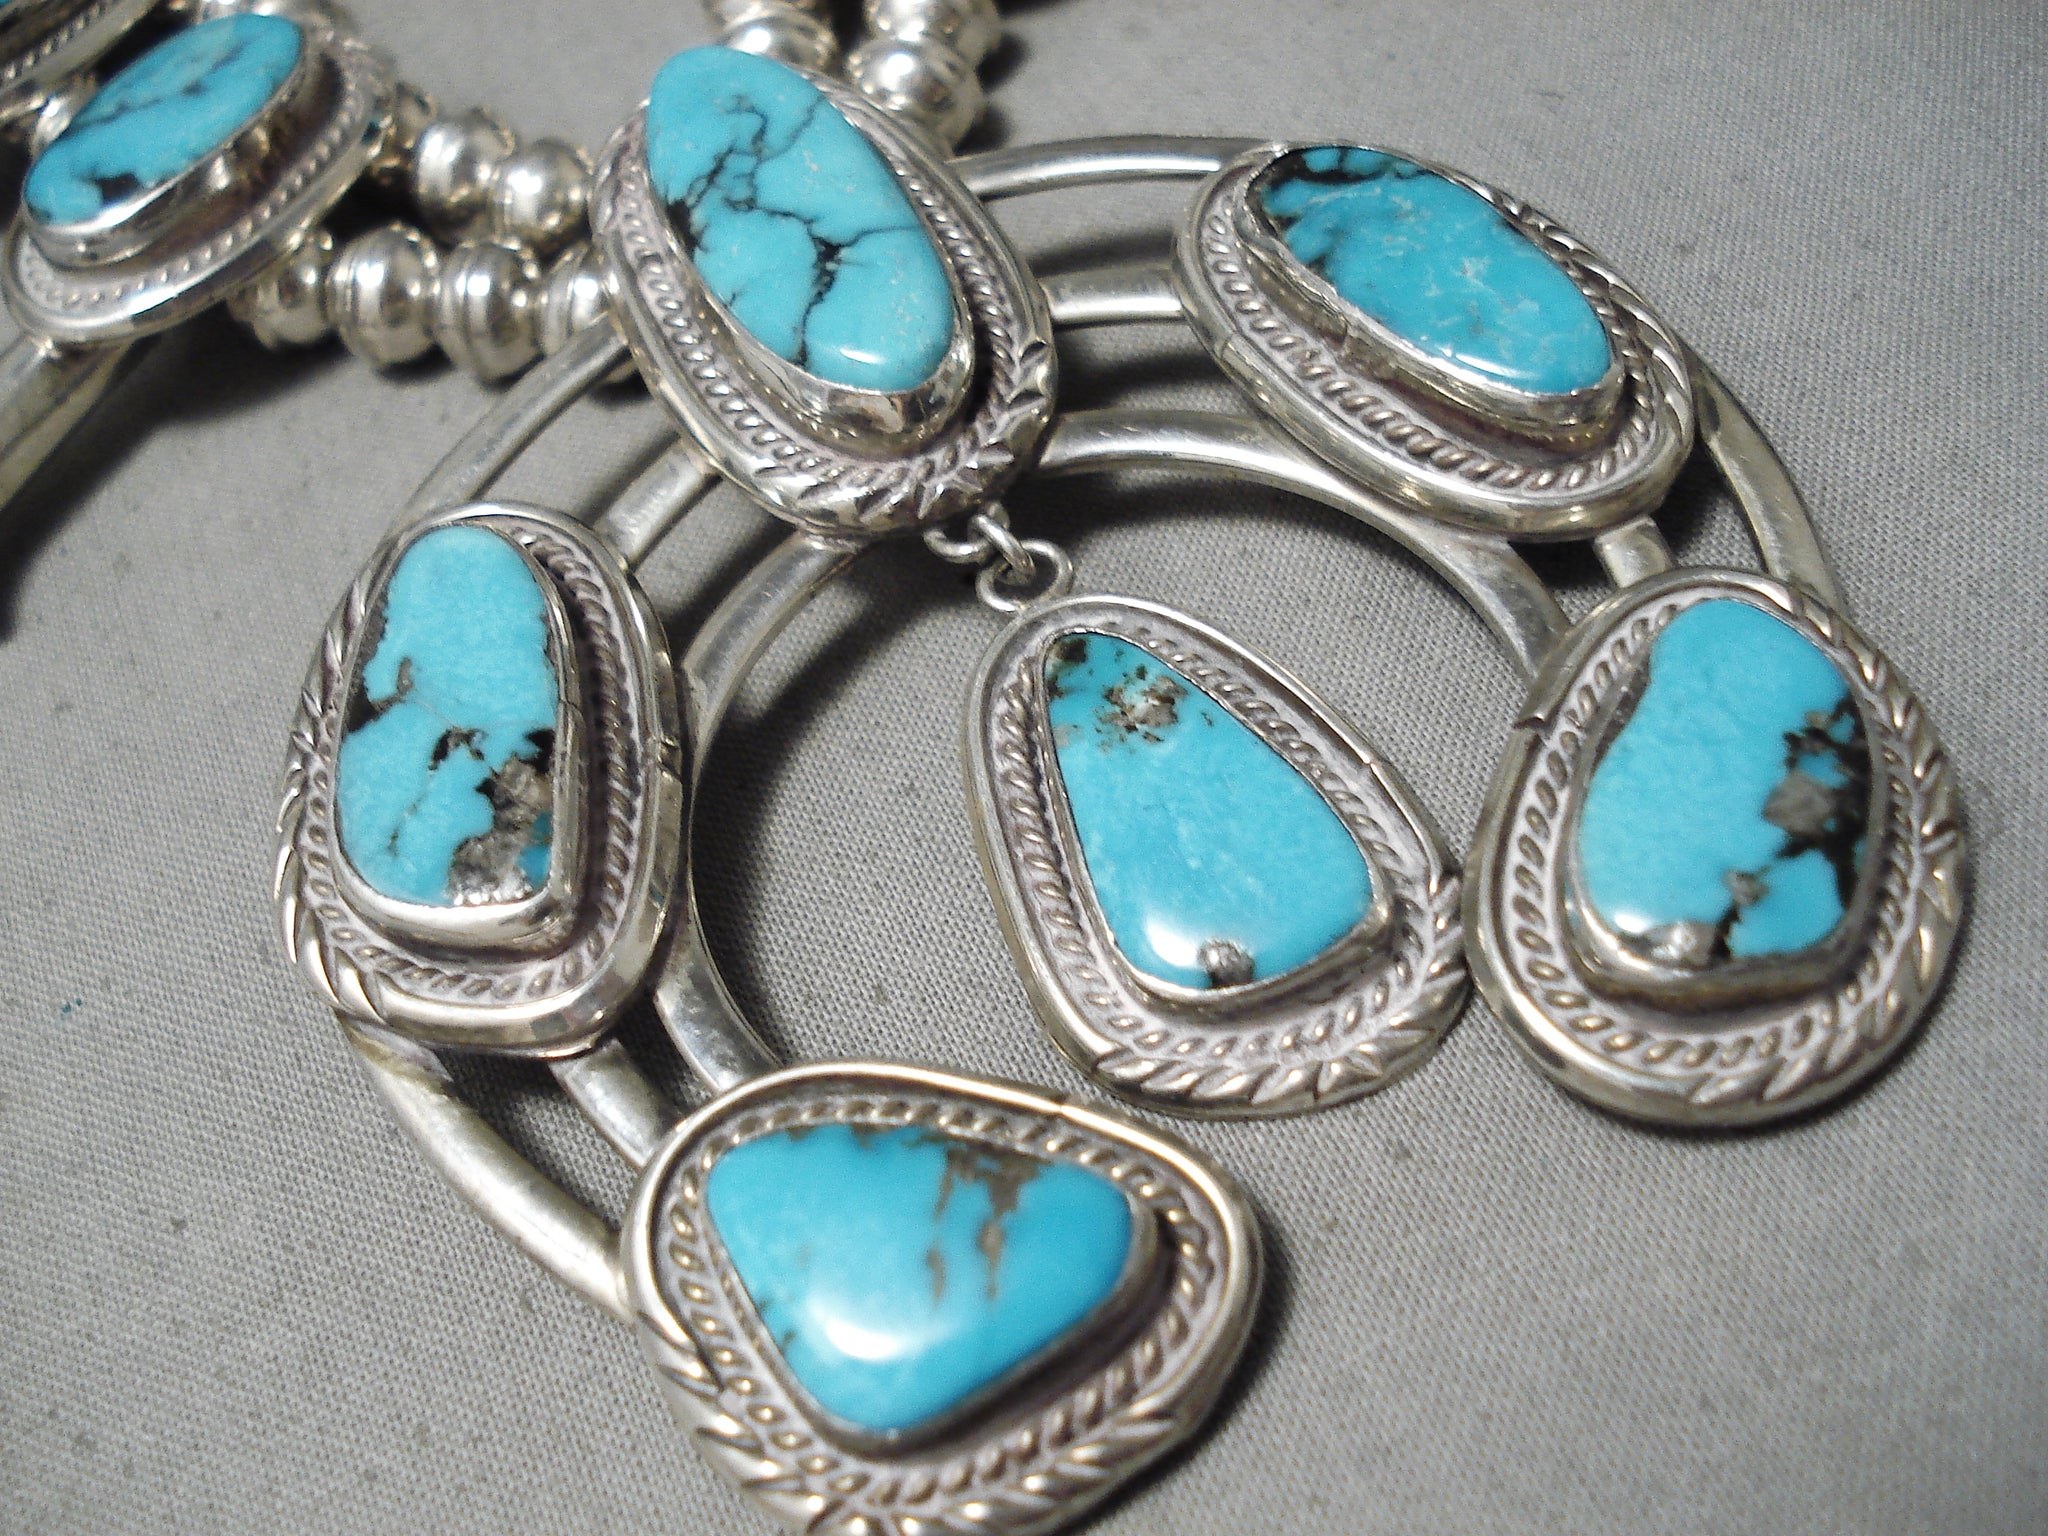 Navajo Sandcast Silver and Turquoise Squash Blossom Necklace